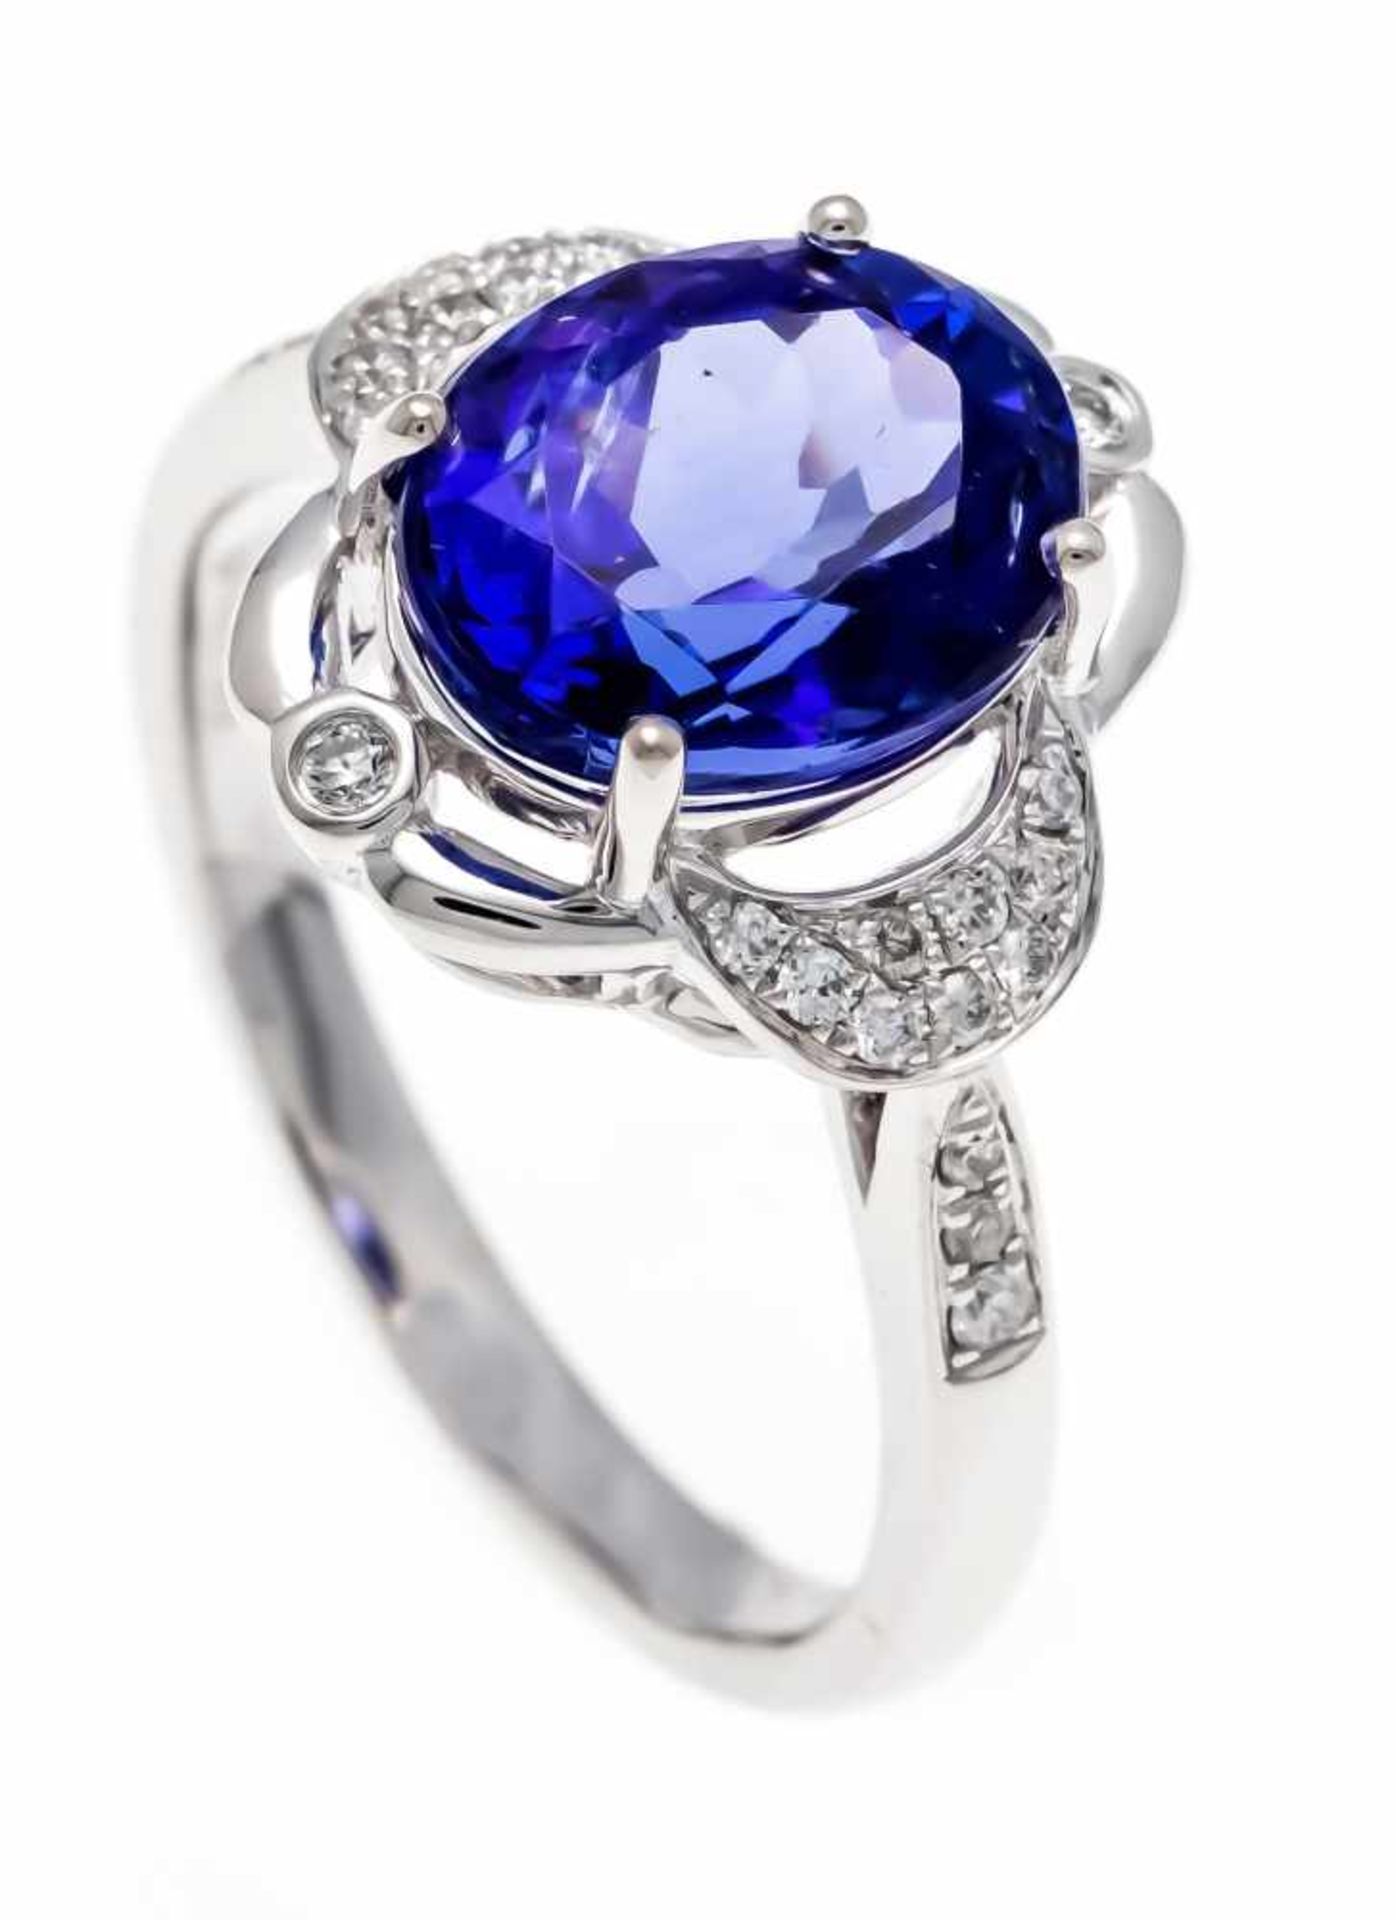 Tanzanite diamond ring WG 750/000 with an excellent fac. Tanzanite 3.54 ct in excellentcolor and